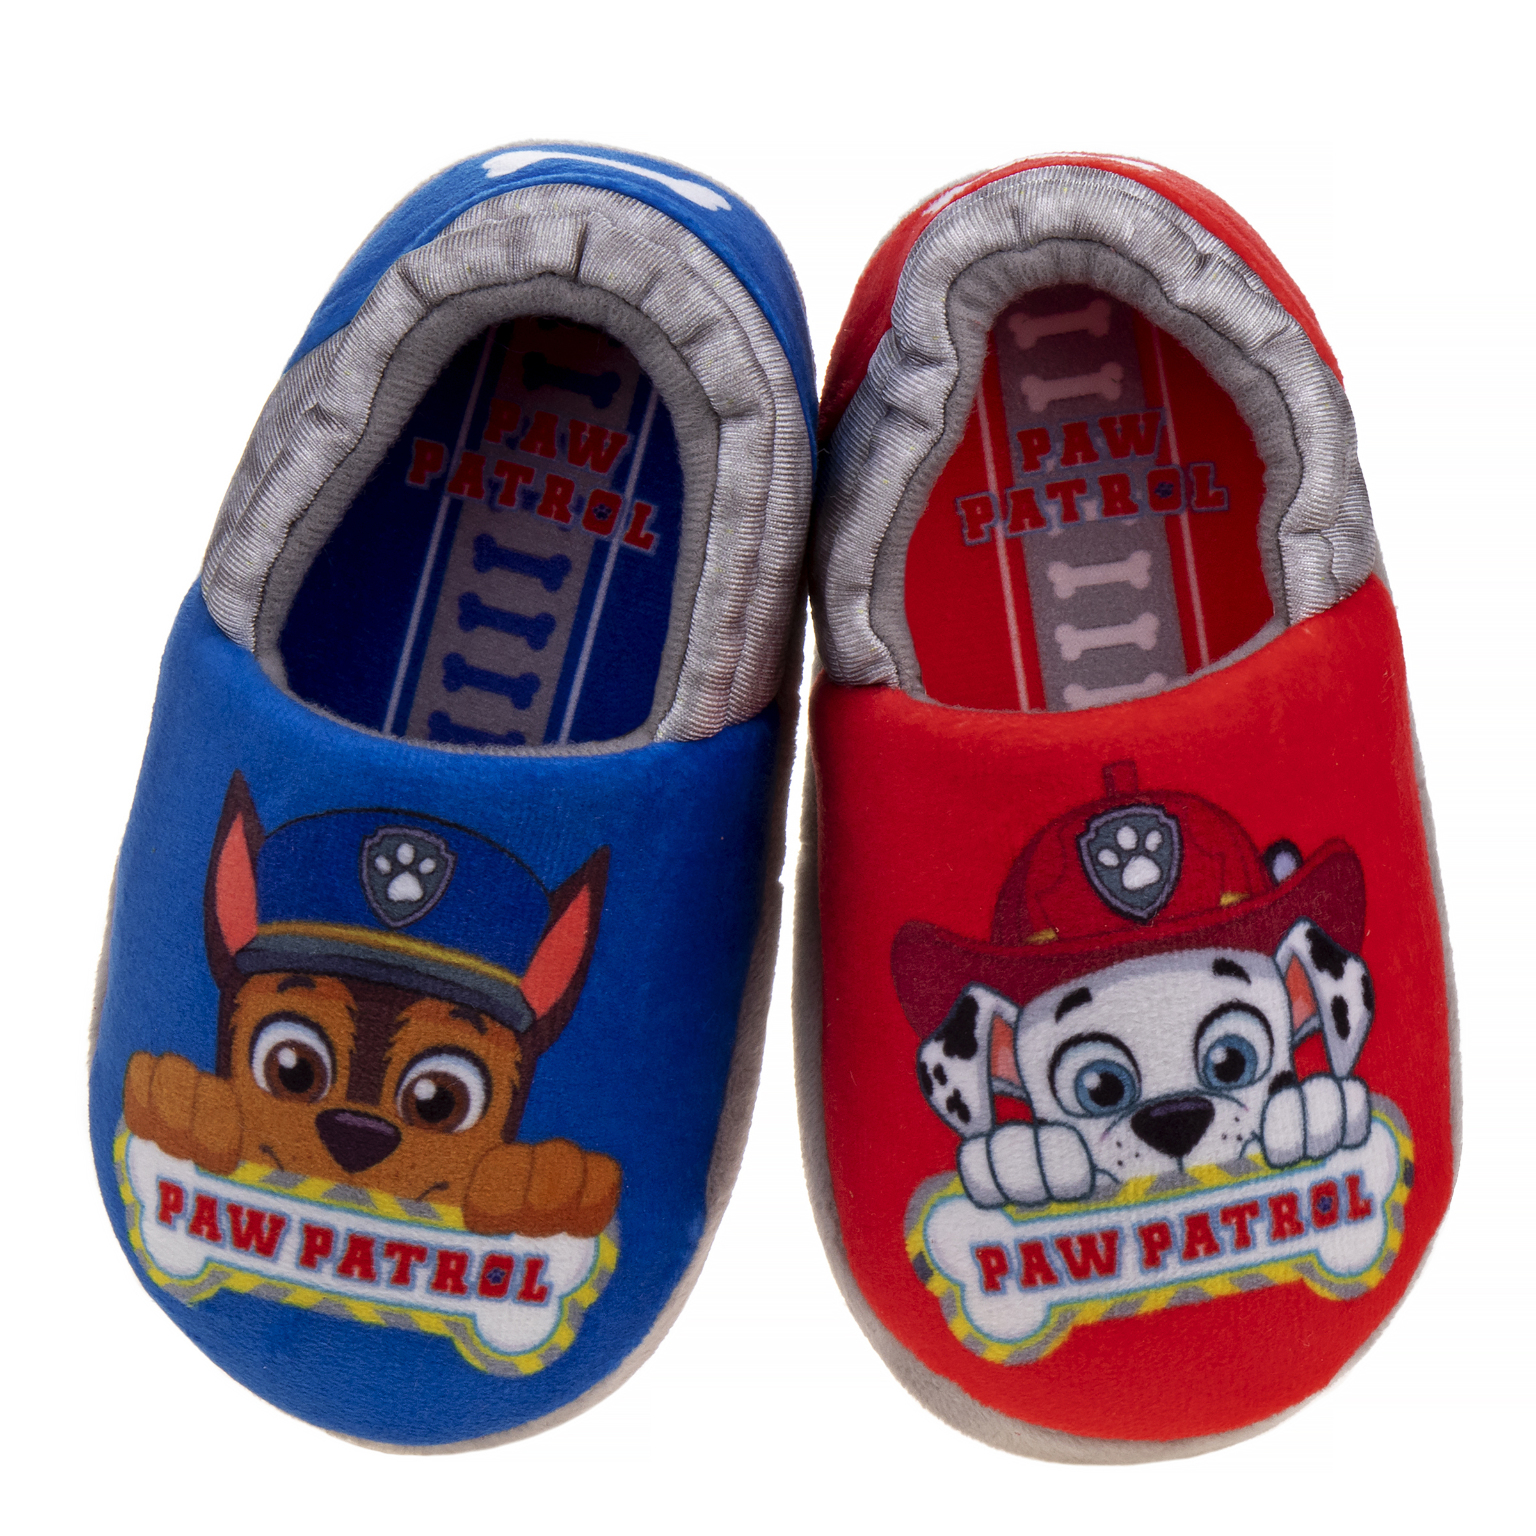 paw patrol slippers for adults